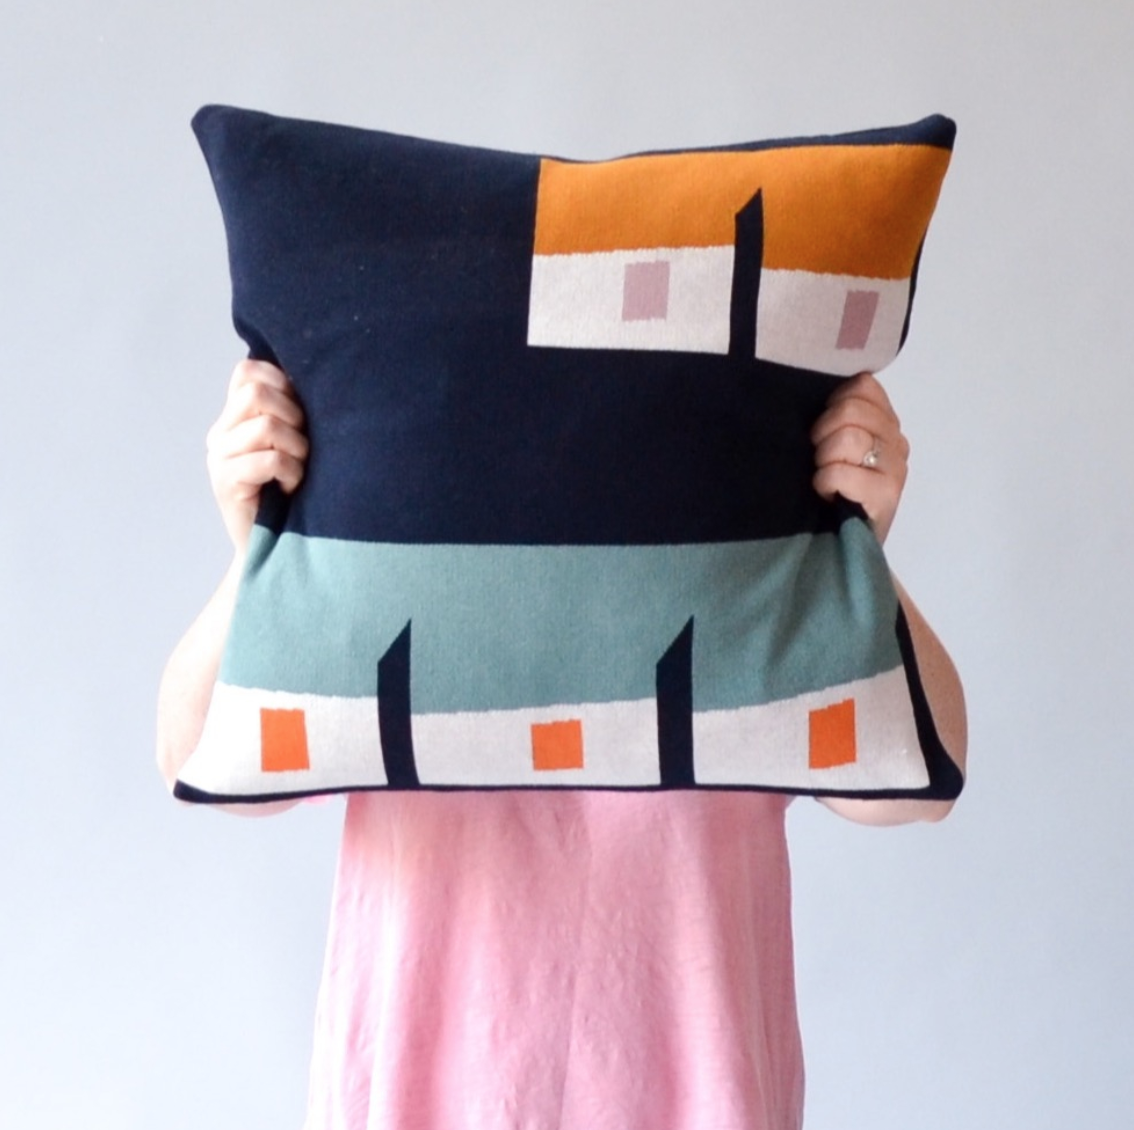 A large cushion demonstrating great product photography